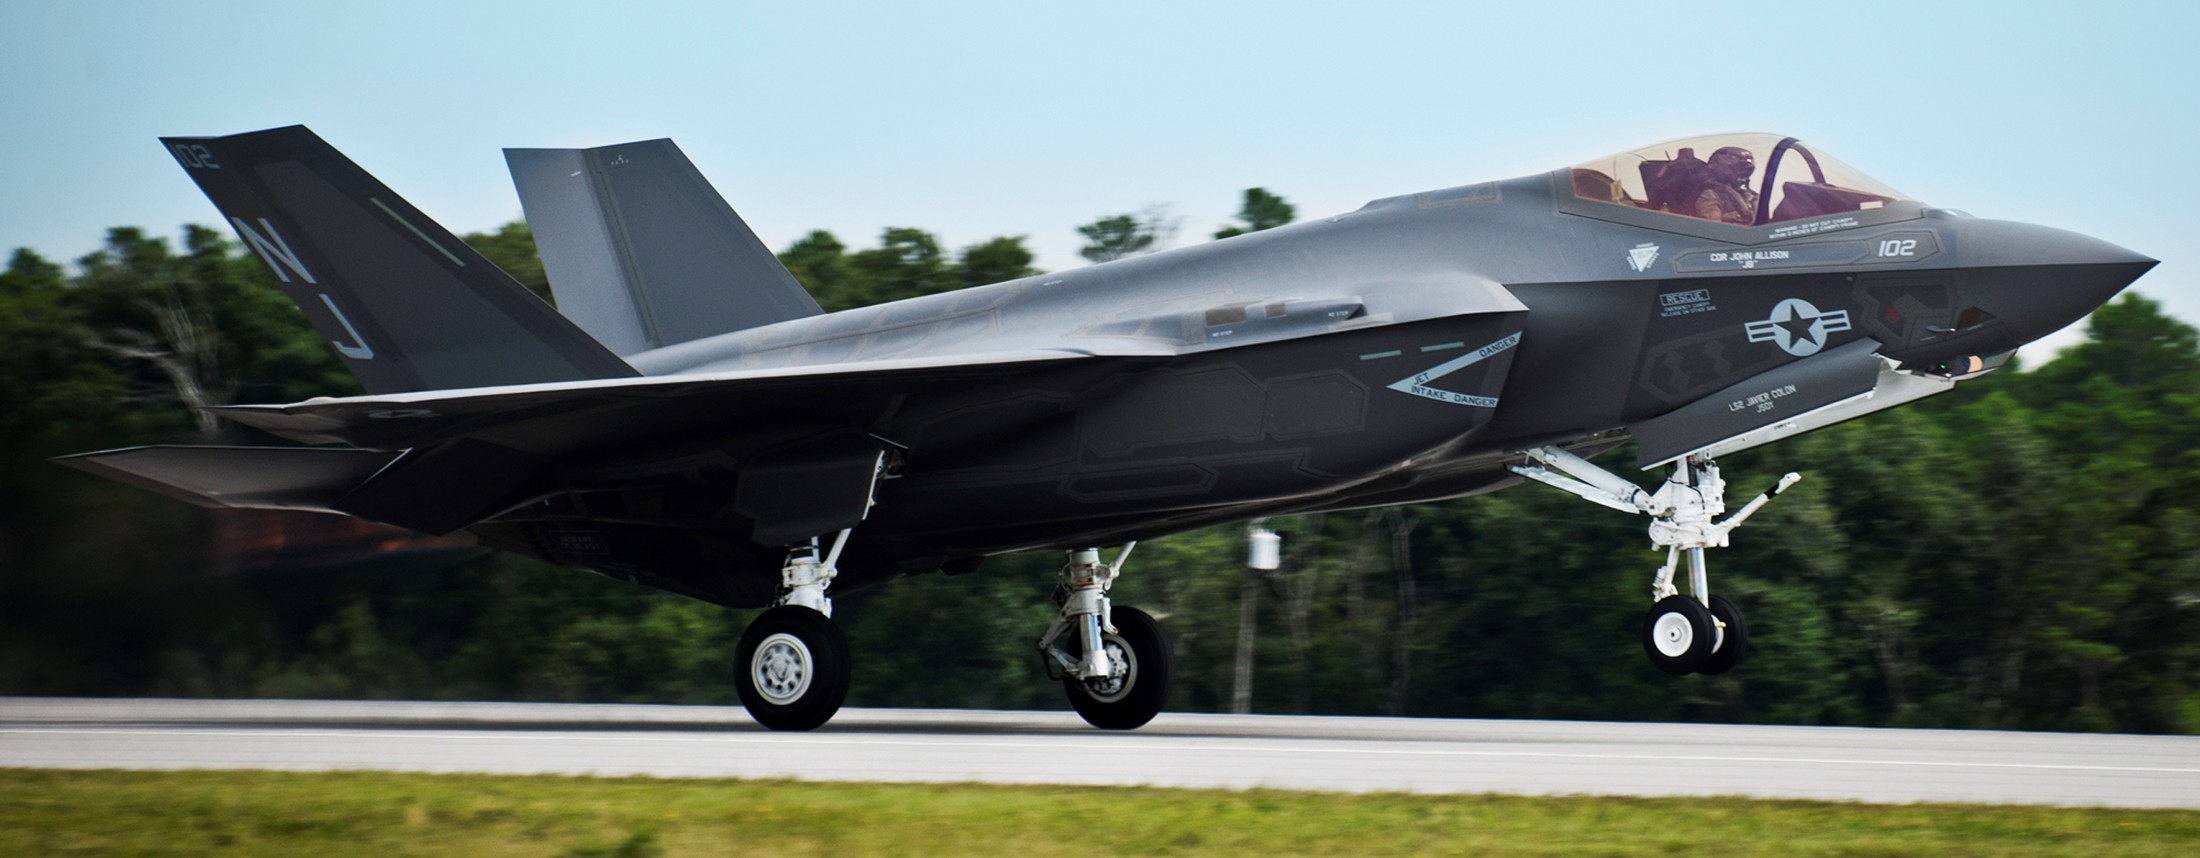 vfa-101 grim reapers strike fighter squadron us navy f-35c lightning jsf frs 63